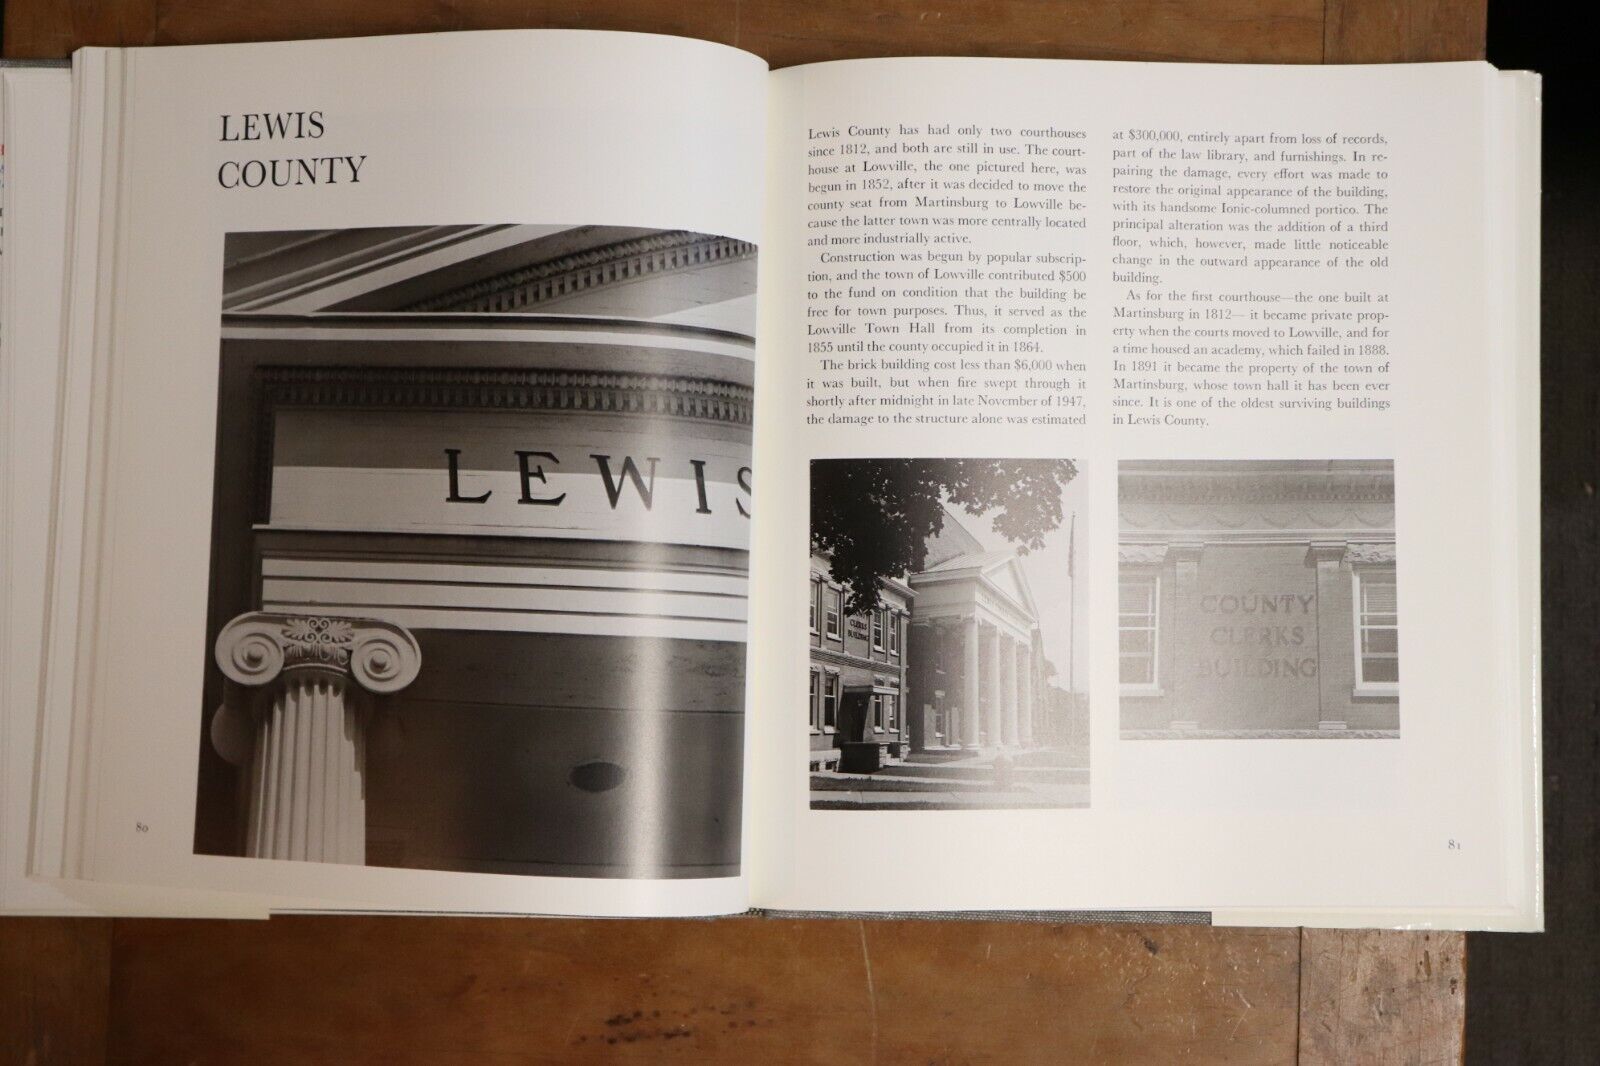 Historic Courthouses of New York State - 1977 - 1st Edition Architecture Book